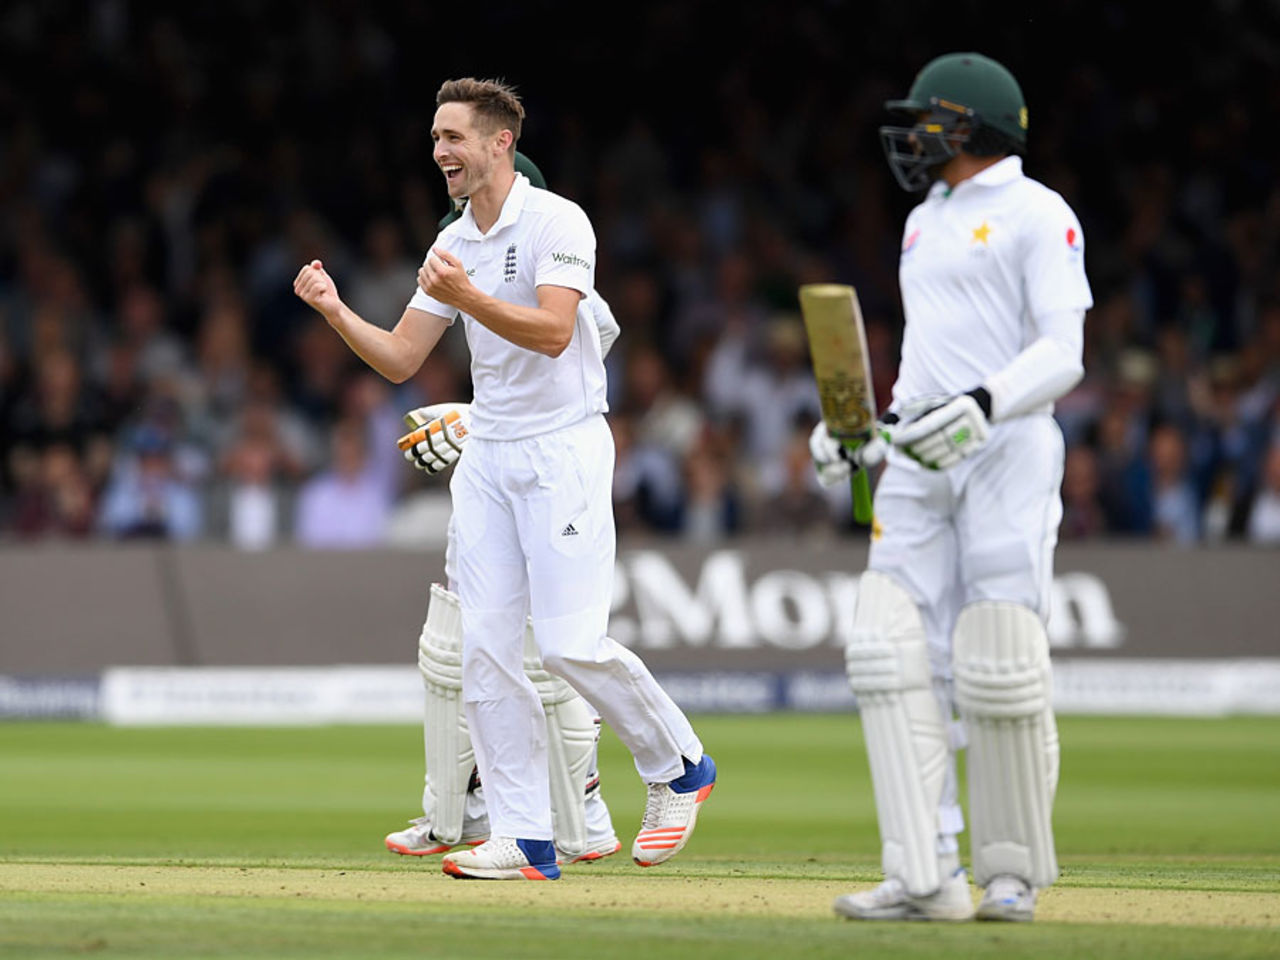 Chris Woakes claimed his second when Mohammad Hafeez top edged a pull, England v Pakistan, 1st Investec Test, Lord's, 1st day, July 14, 2016